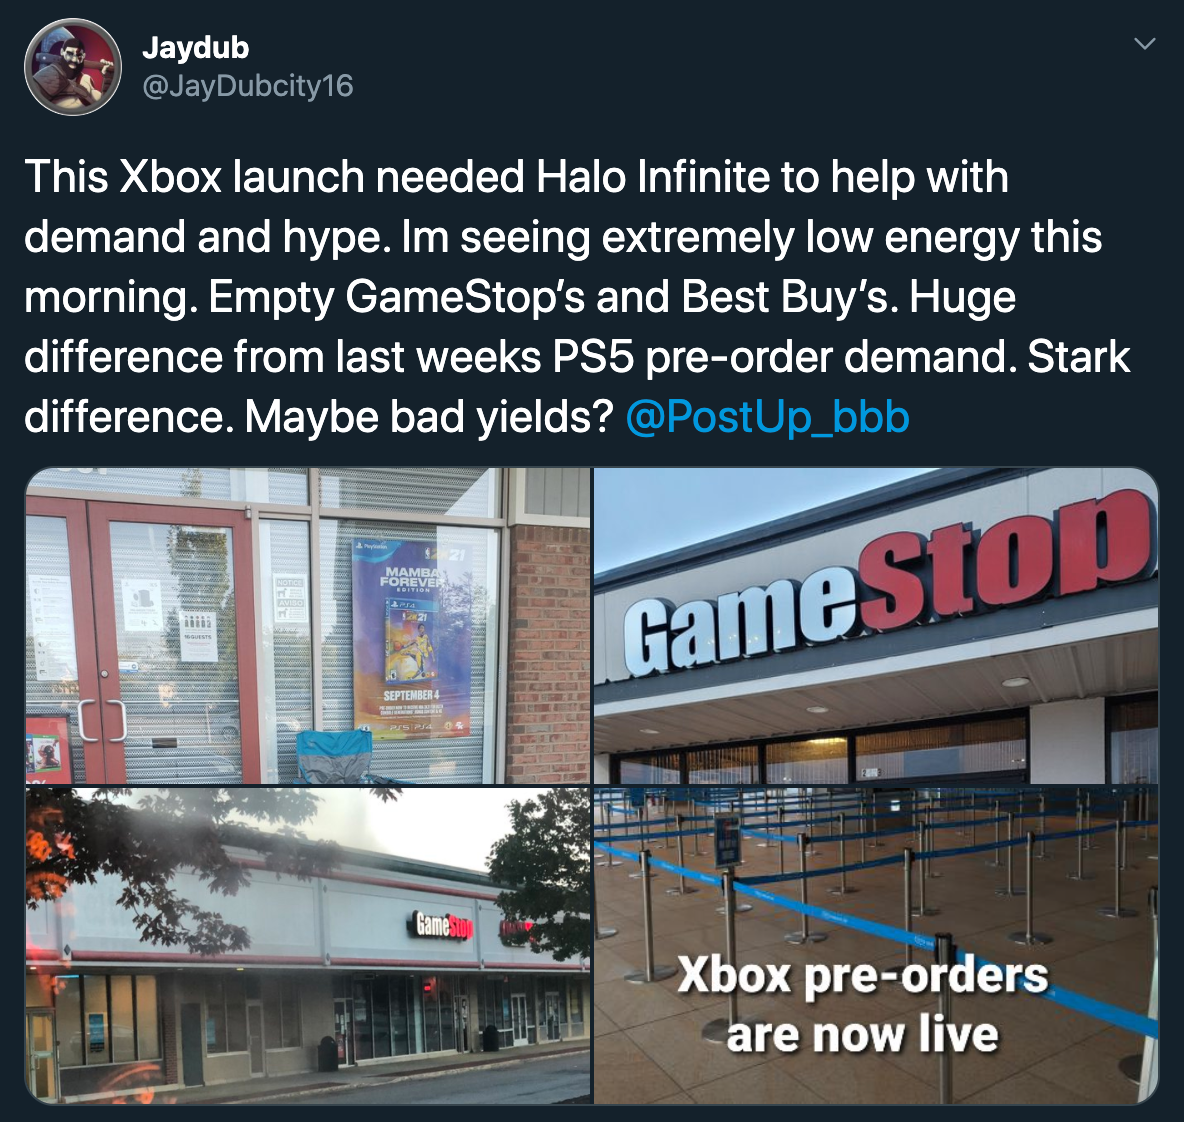 This Xbox launch needed Halo Infinite to help with demand and hype. Im seeing extremely low energy this morning. Empty GameStop's and Best Buy's. Huge difference from last weeks PS5 preorder demand. Stark difference.